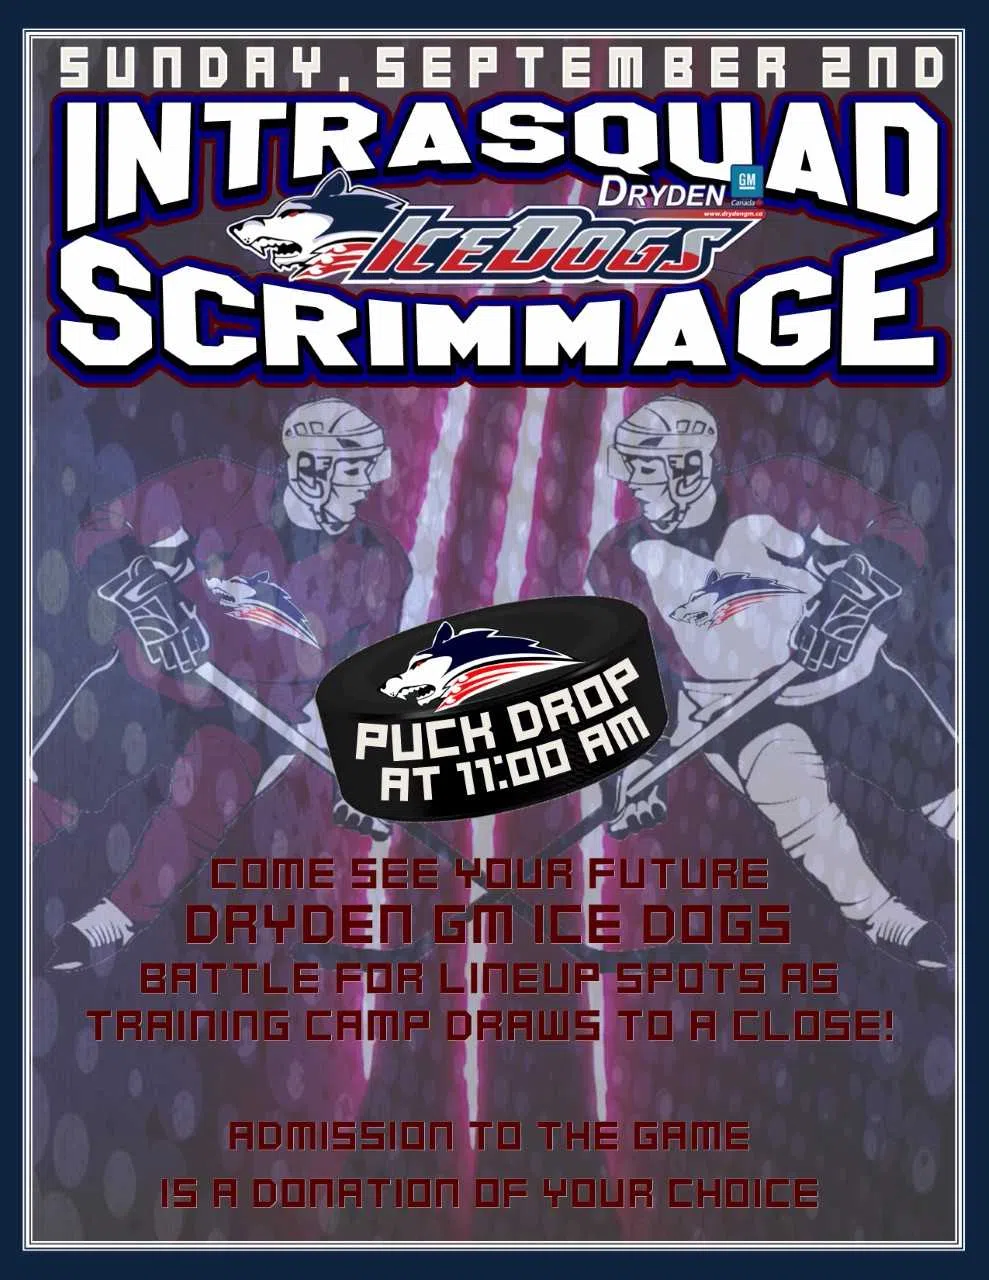 Ice Dogs Intrasquad Game Sunday